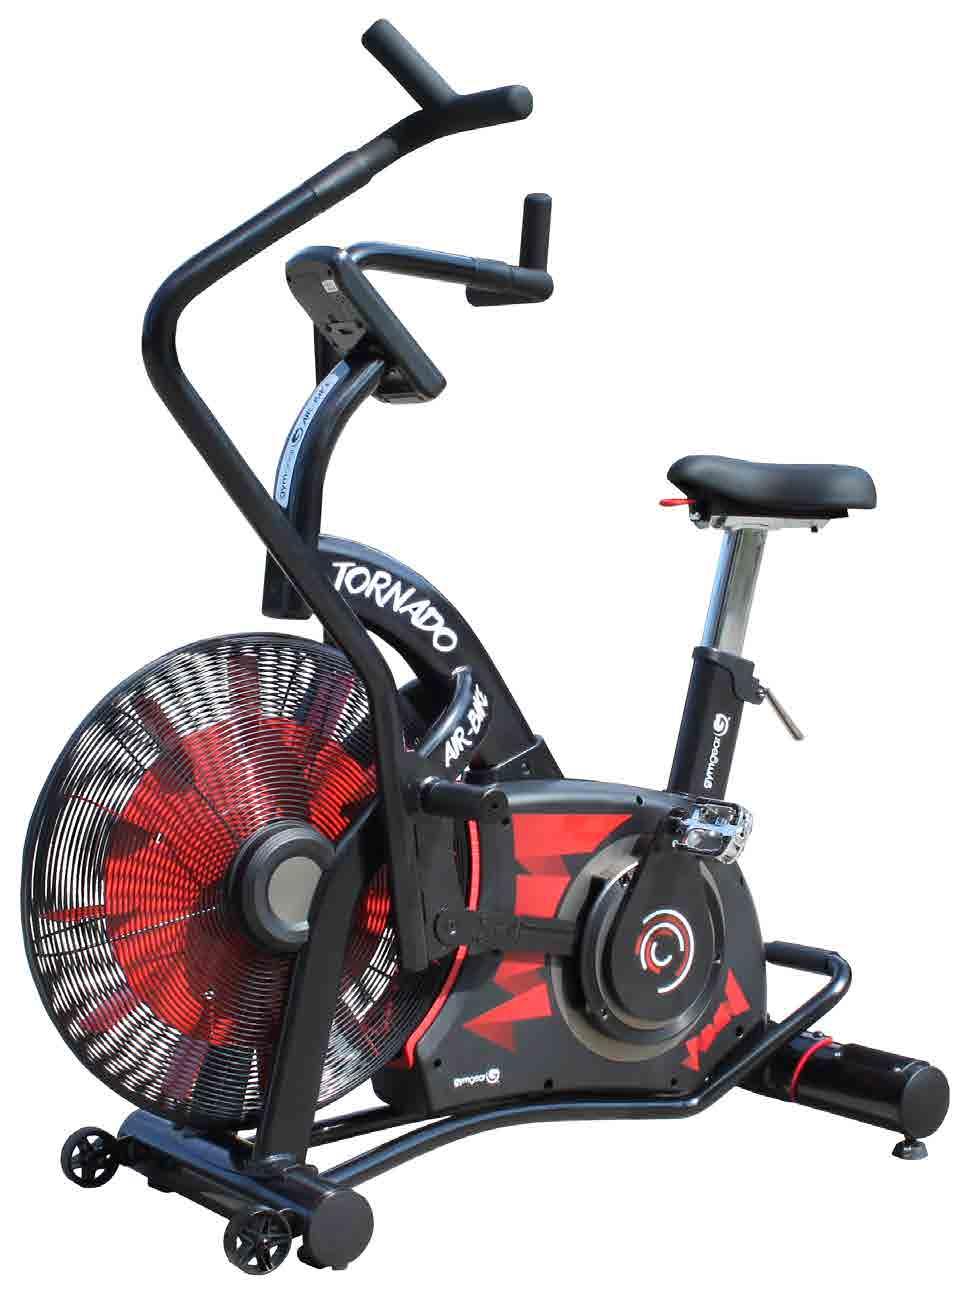 Tornado Airbike Overview: The new Gym Gear Tornado Air Bike is the perfect tool for intense cardio workouts, or more gentle workouts and rehabilitation.